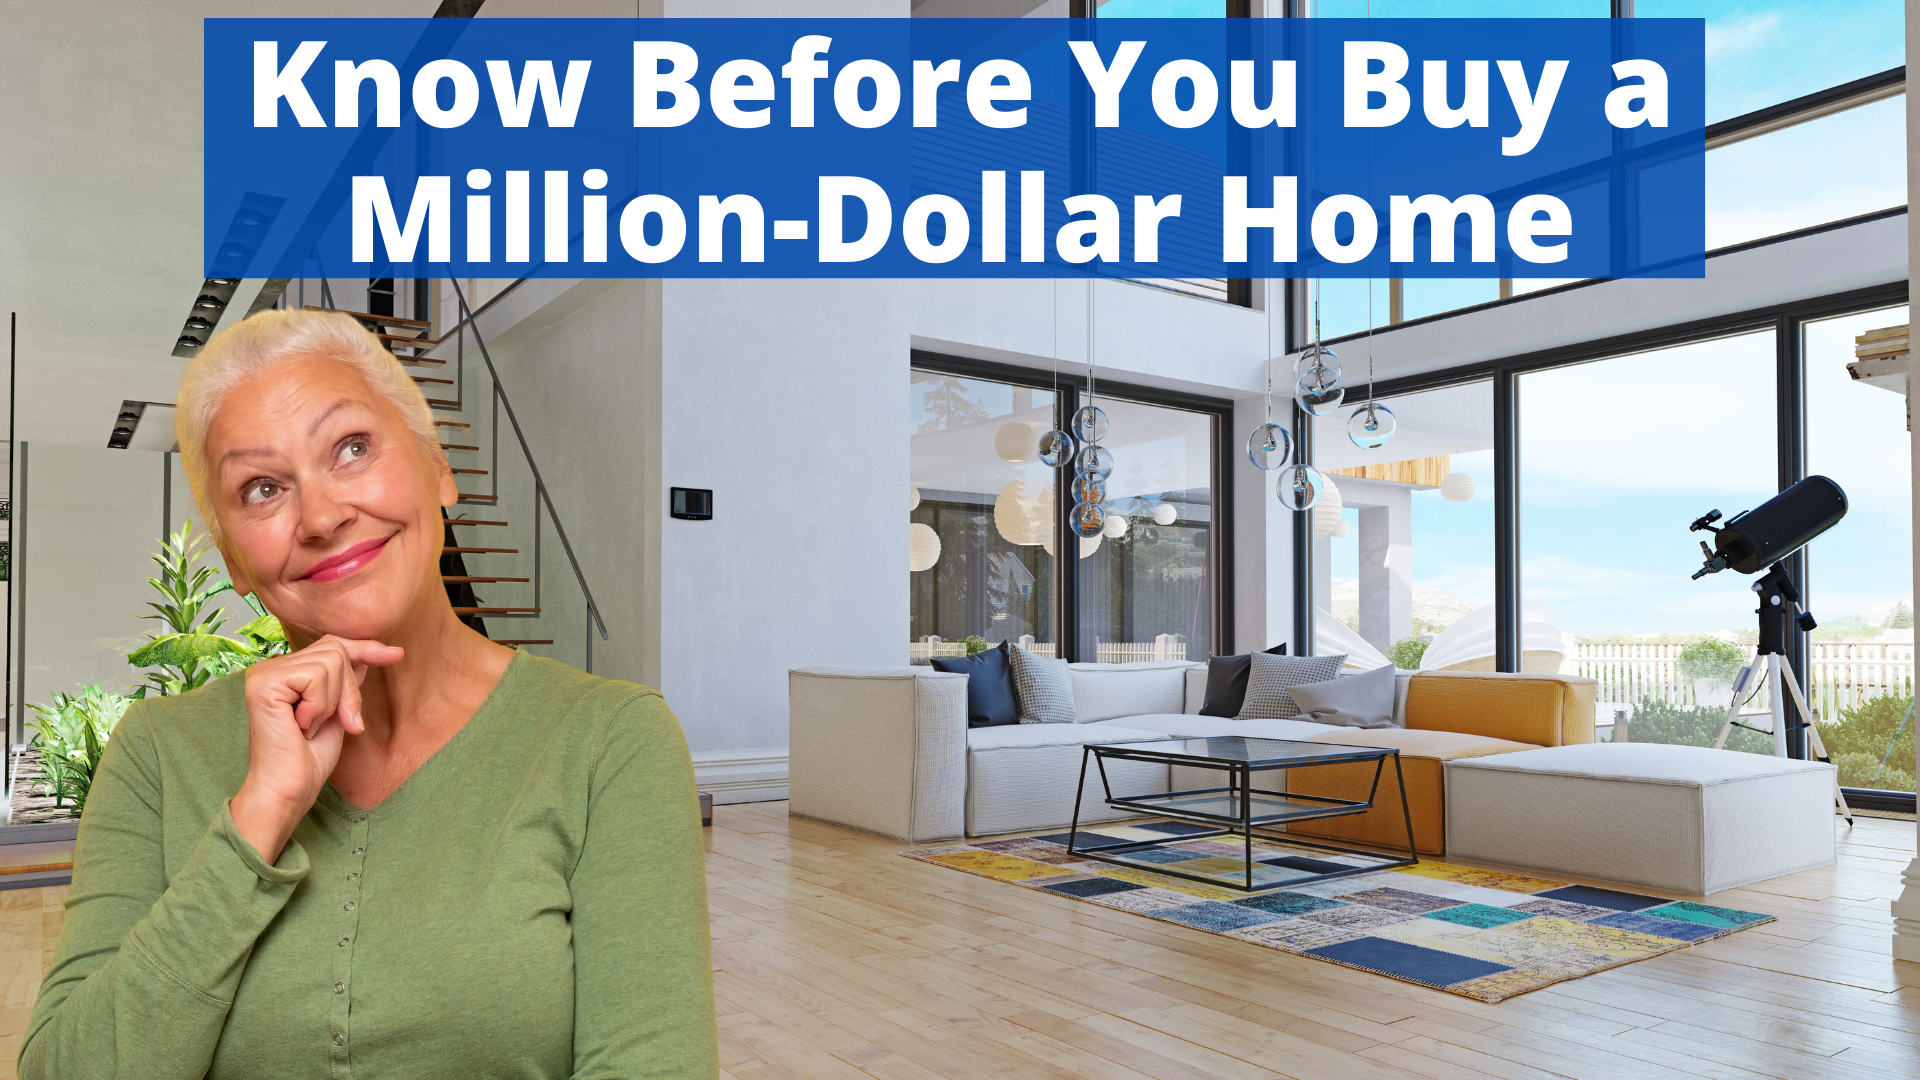 Know Before You Buy a Million-Dollar Home